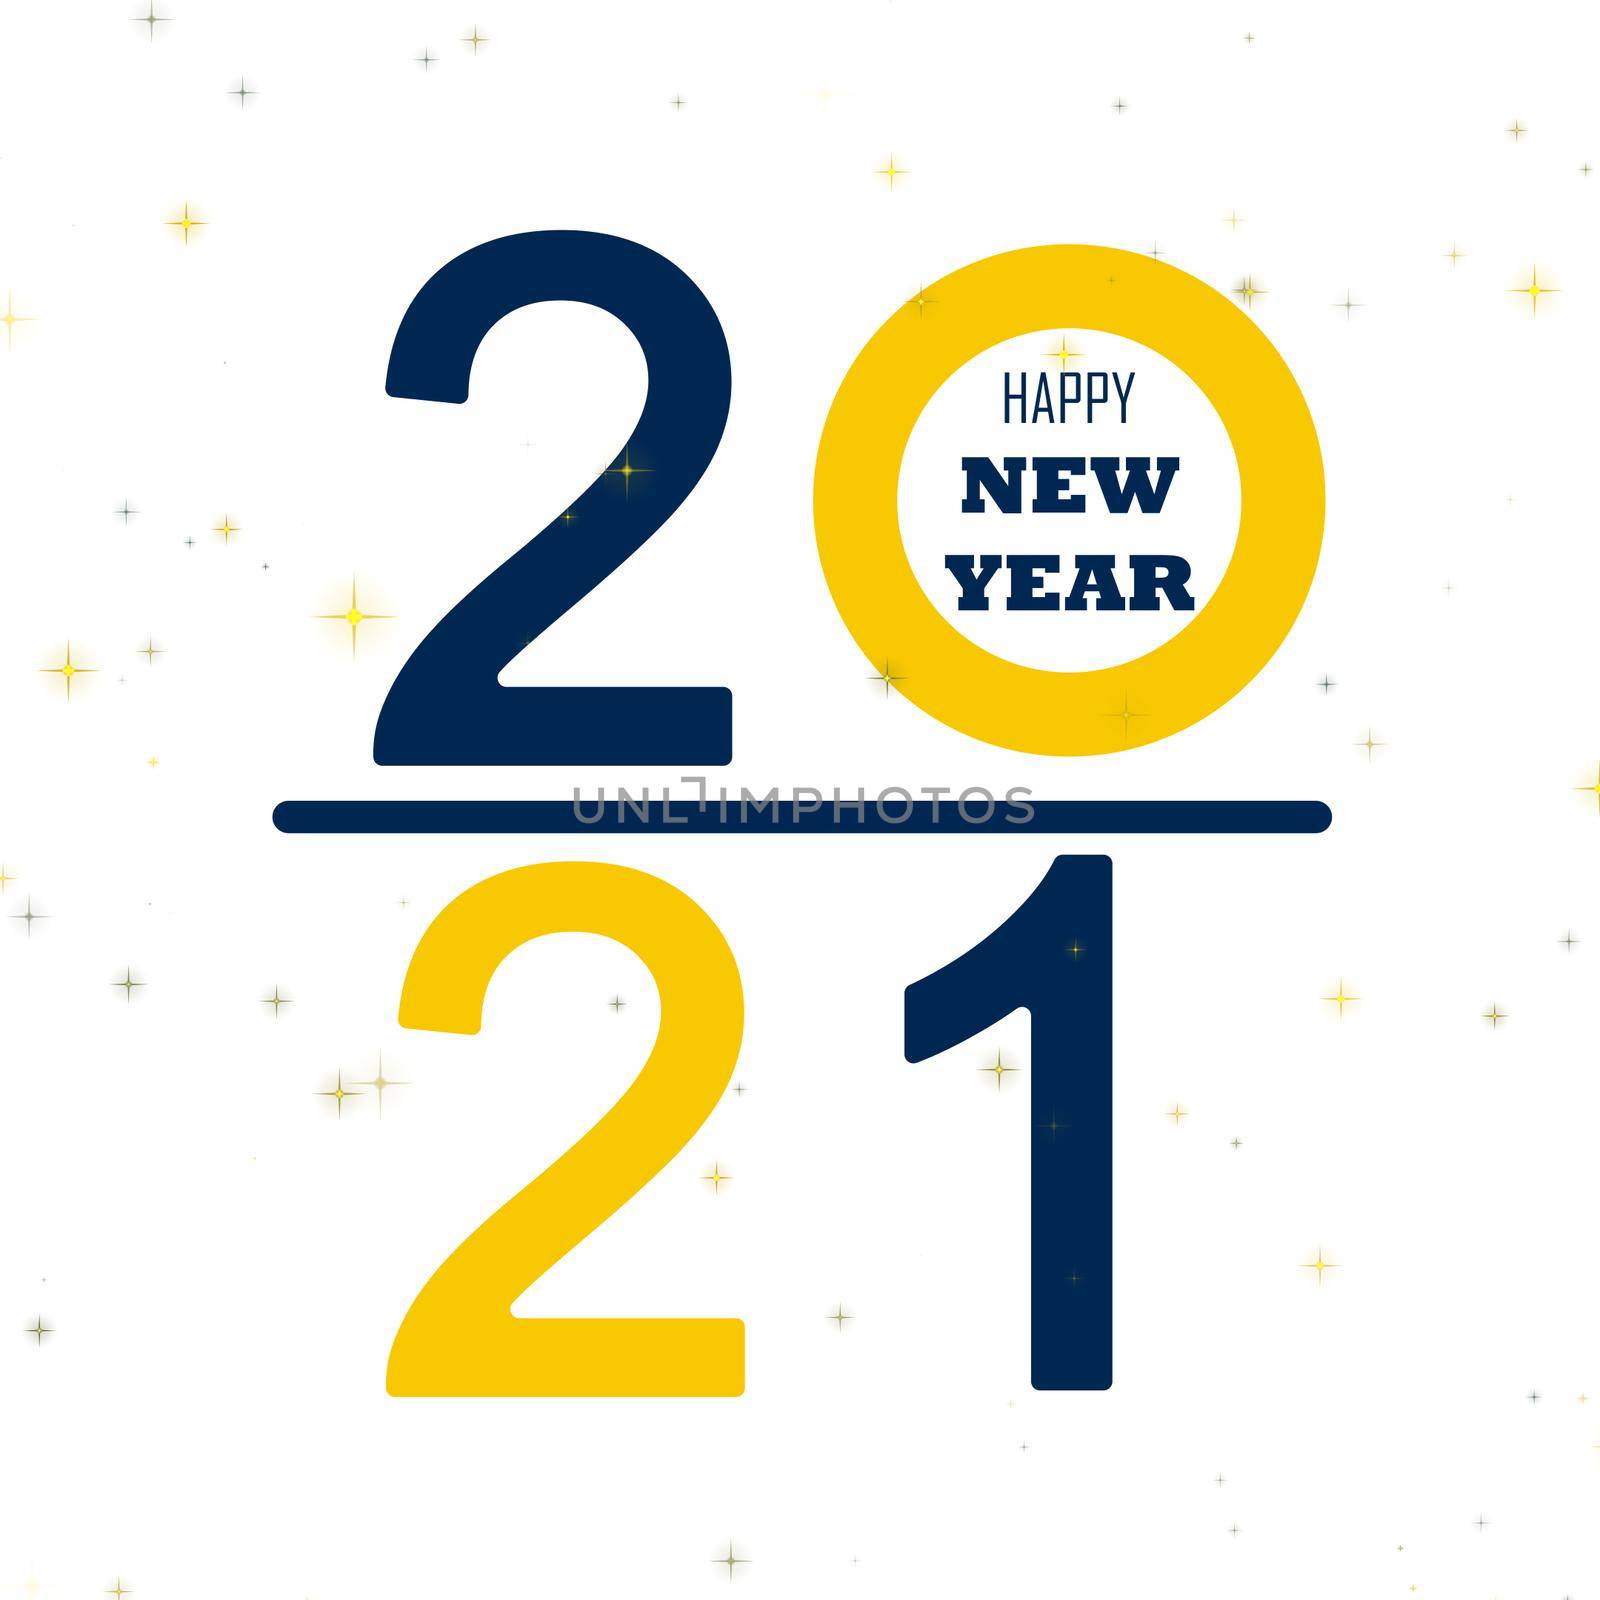 Happy New year 2021 alphabet text on isolated white background. Typography font graphic desgin. Graphic design illustration